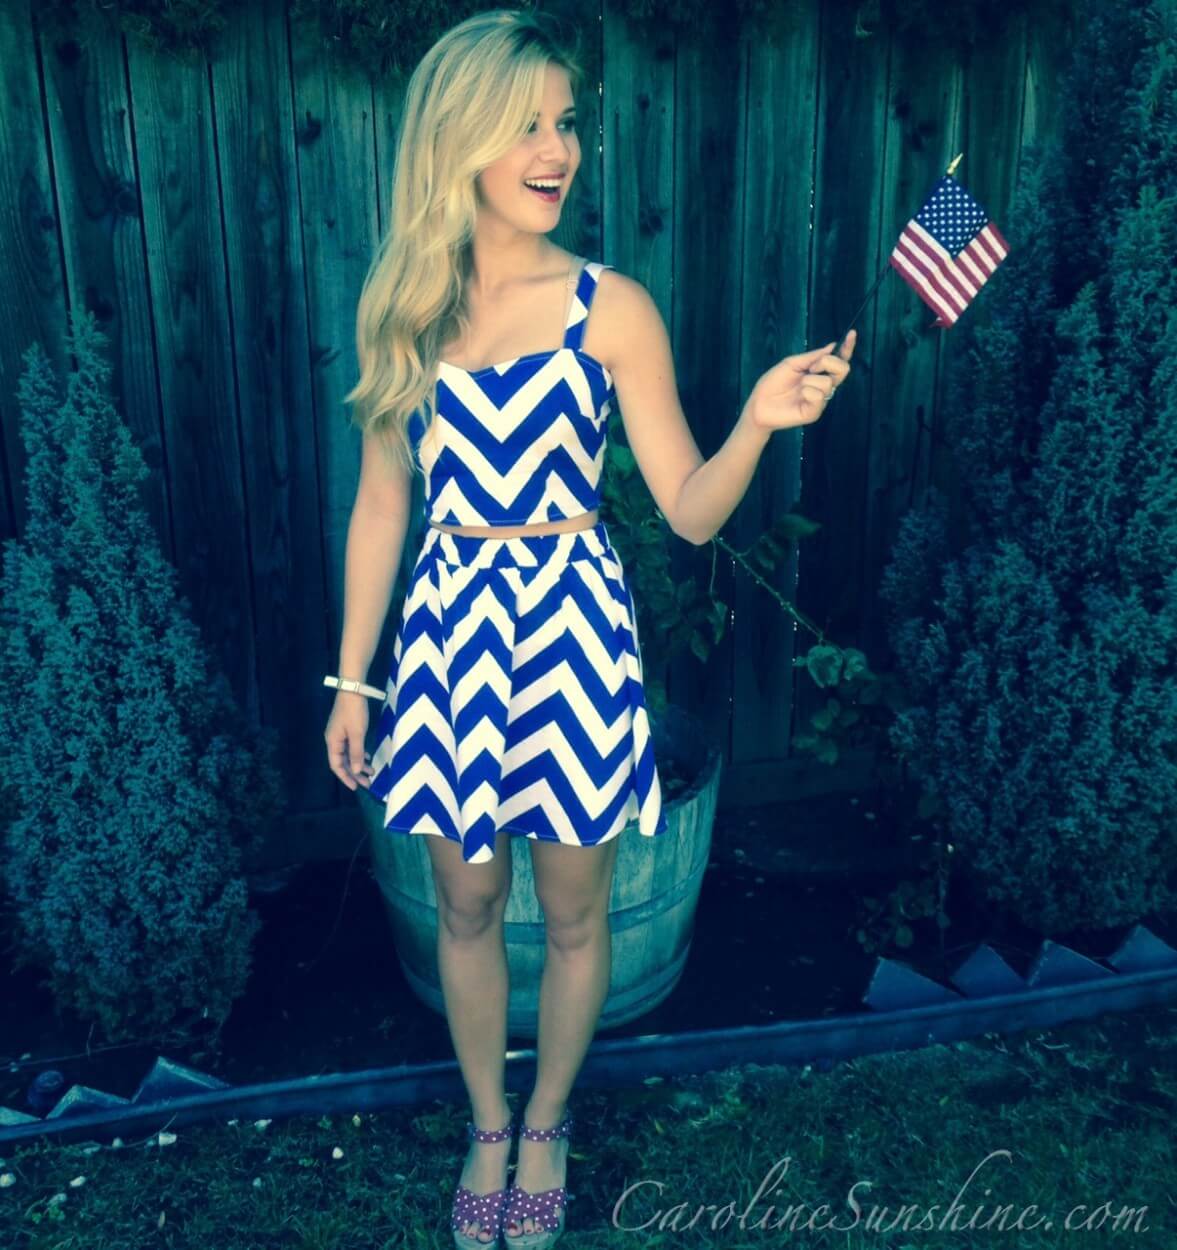 49 Hot Pictures Of Caroline Sunshine Are Amazingly Beautiful | Best Of Comic Books